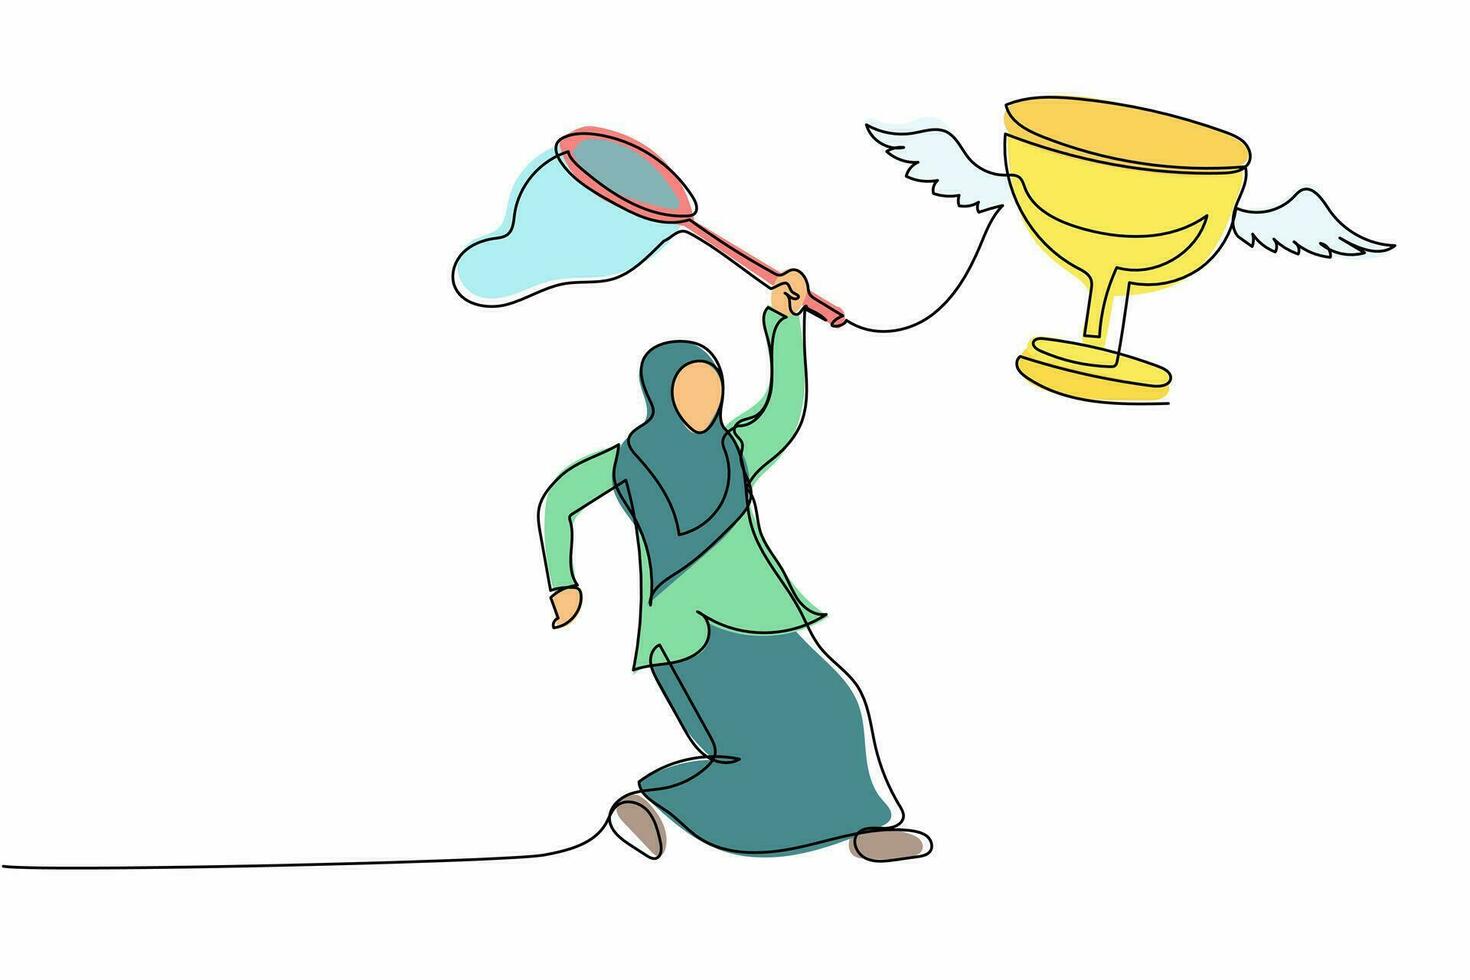 Single continuous line drawing Arabian businesswoman try to catching flying trophy with butterfly net. Losing victory competition. Failed the match. One line draw graphic design vector illustration